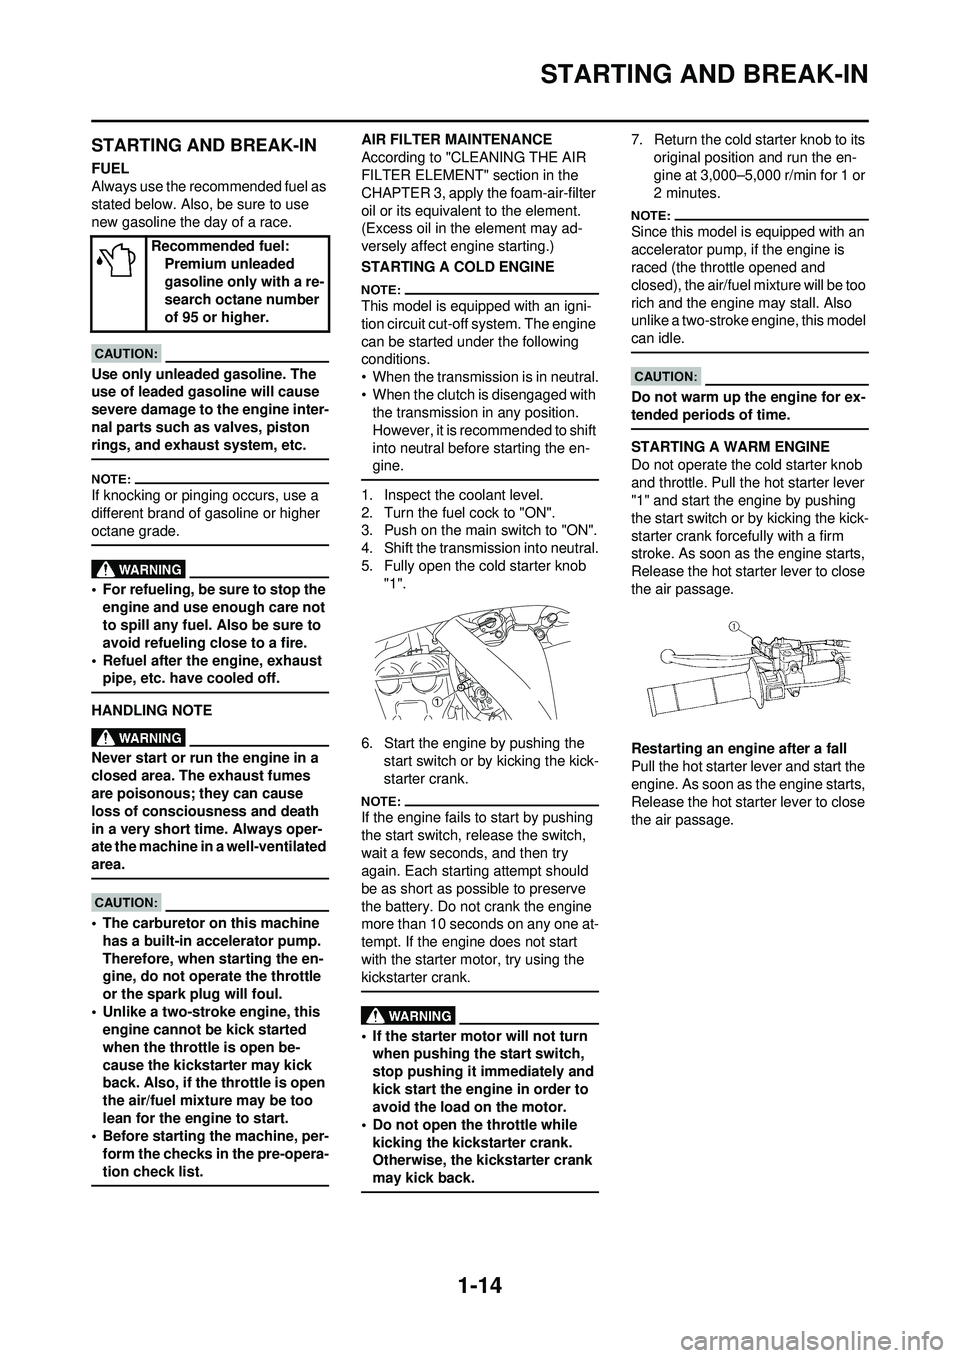 YAMAHA WR 250F 2008  Owners Manual 1-14
STARTING AND BREAK-IN
STARTING AND BREAK-IN
FUEL
Always use the recommended fuel as 
stated below. Also, be sure to use 
new gasoline the day of a race.
Use only unleaded gasoline. The 
use of le